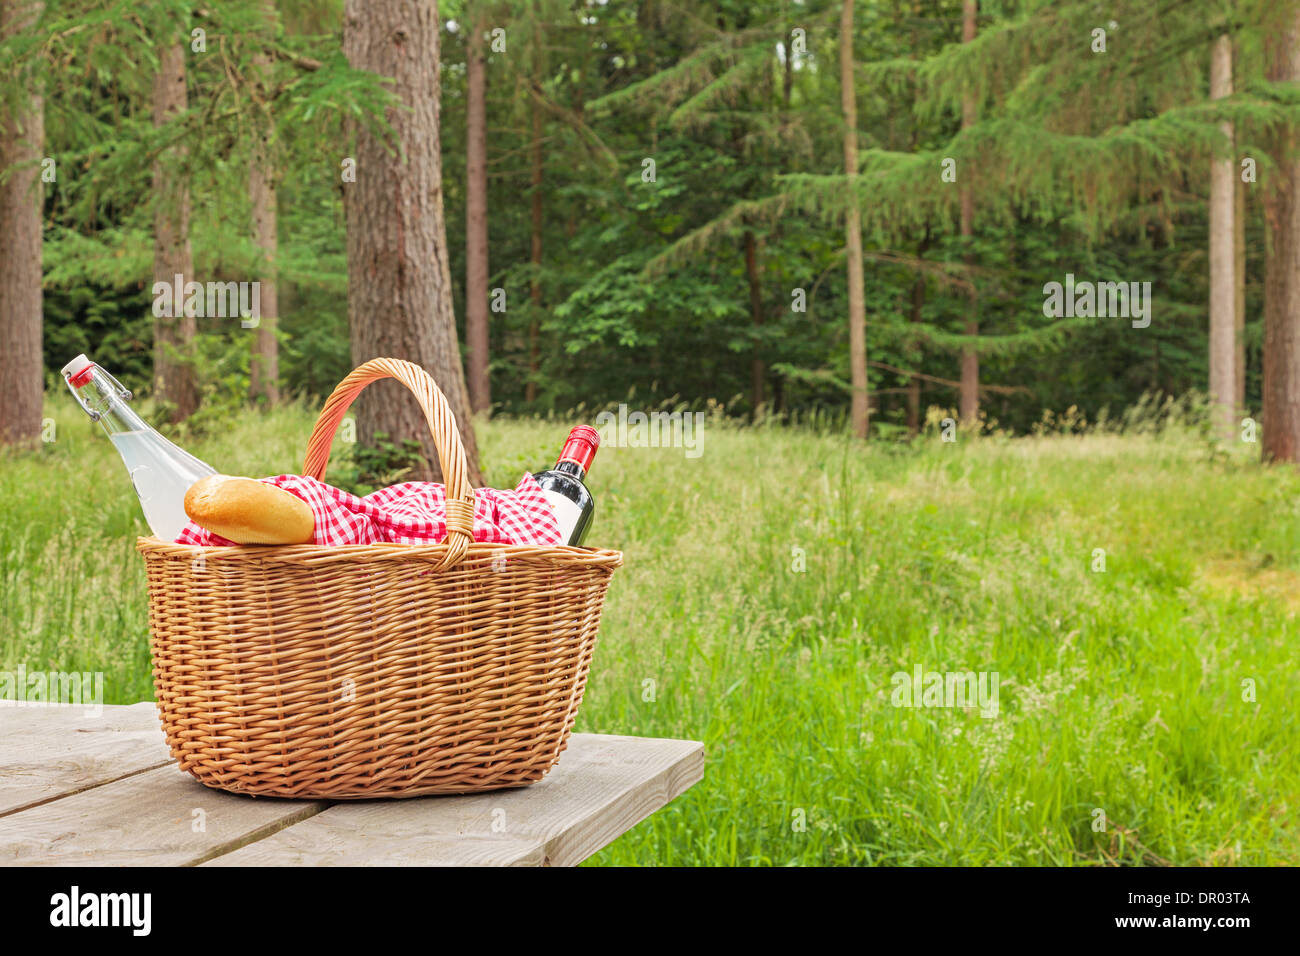 A whicker picnic basket full of food and drink on a table in a woodland setting on a bright summers day. Stock Photo